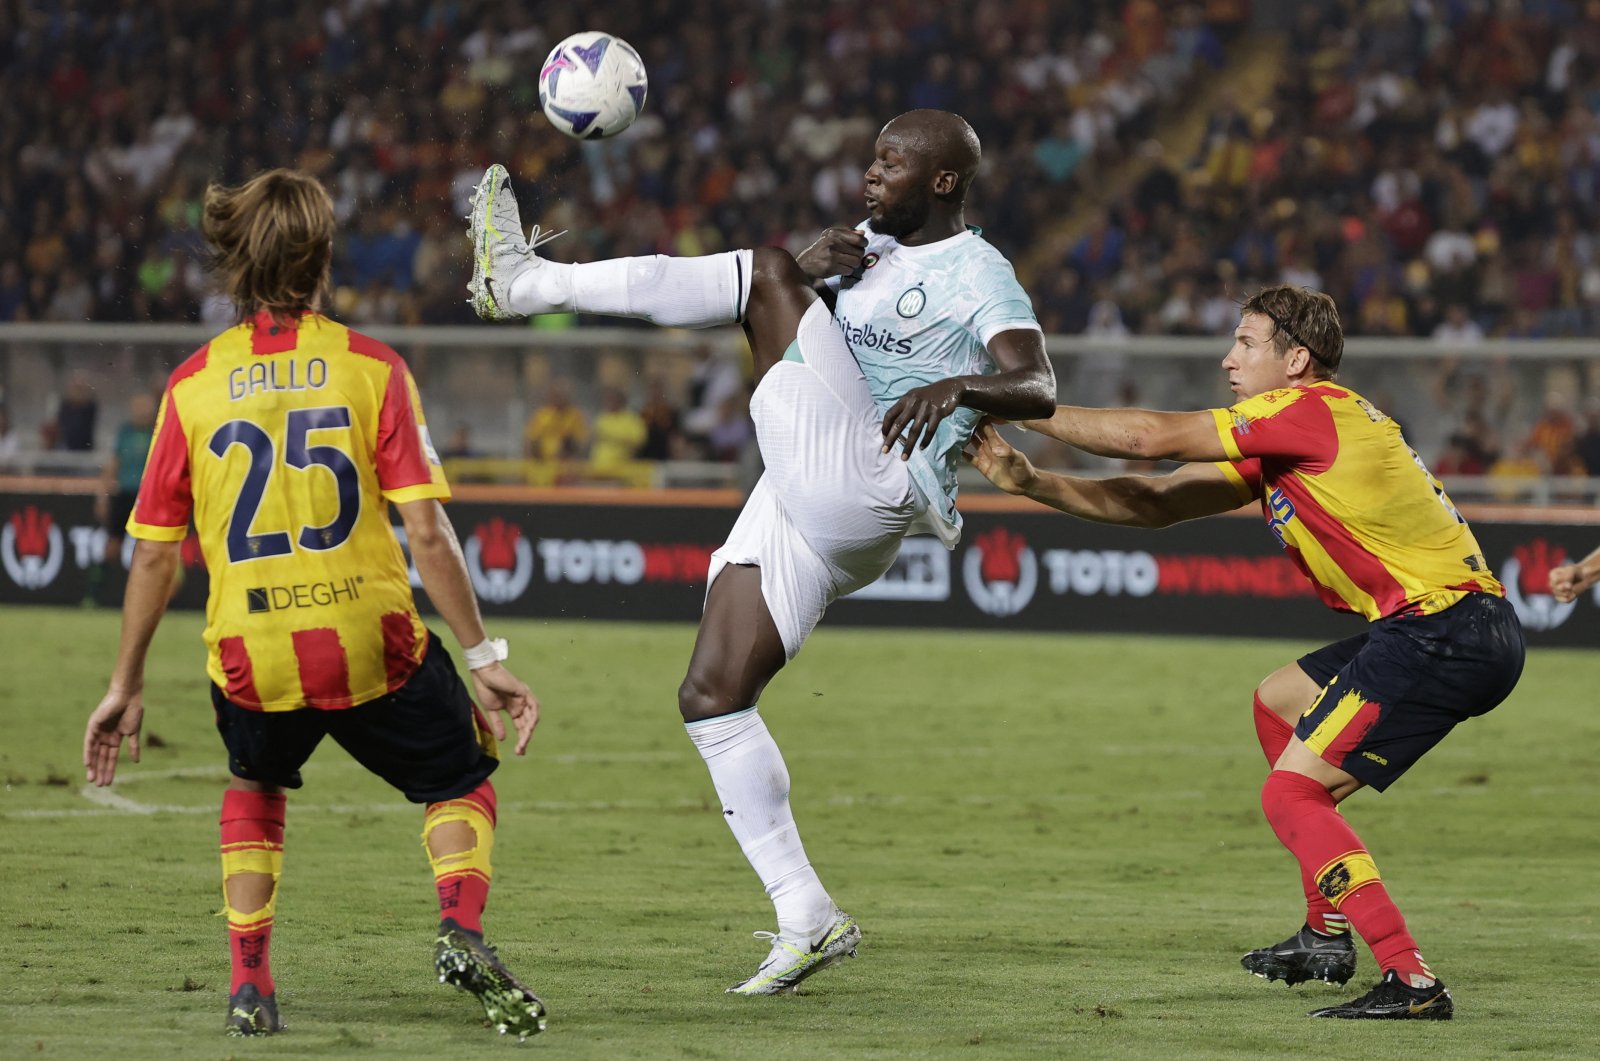 Inter Milan&#039;s Romelu Lukaku in action during a Serie A match against Lecce, Leece, Italy, Aug. 13, 2022. (Reuters Photo)